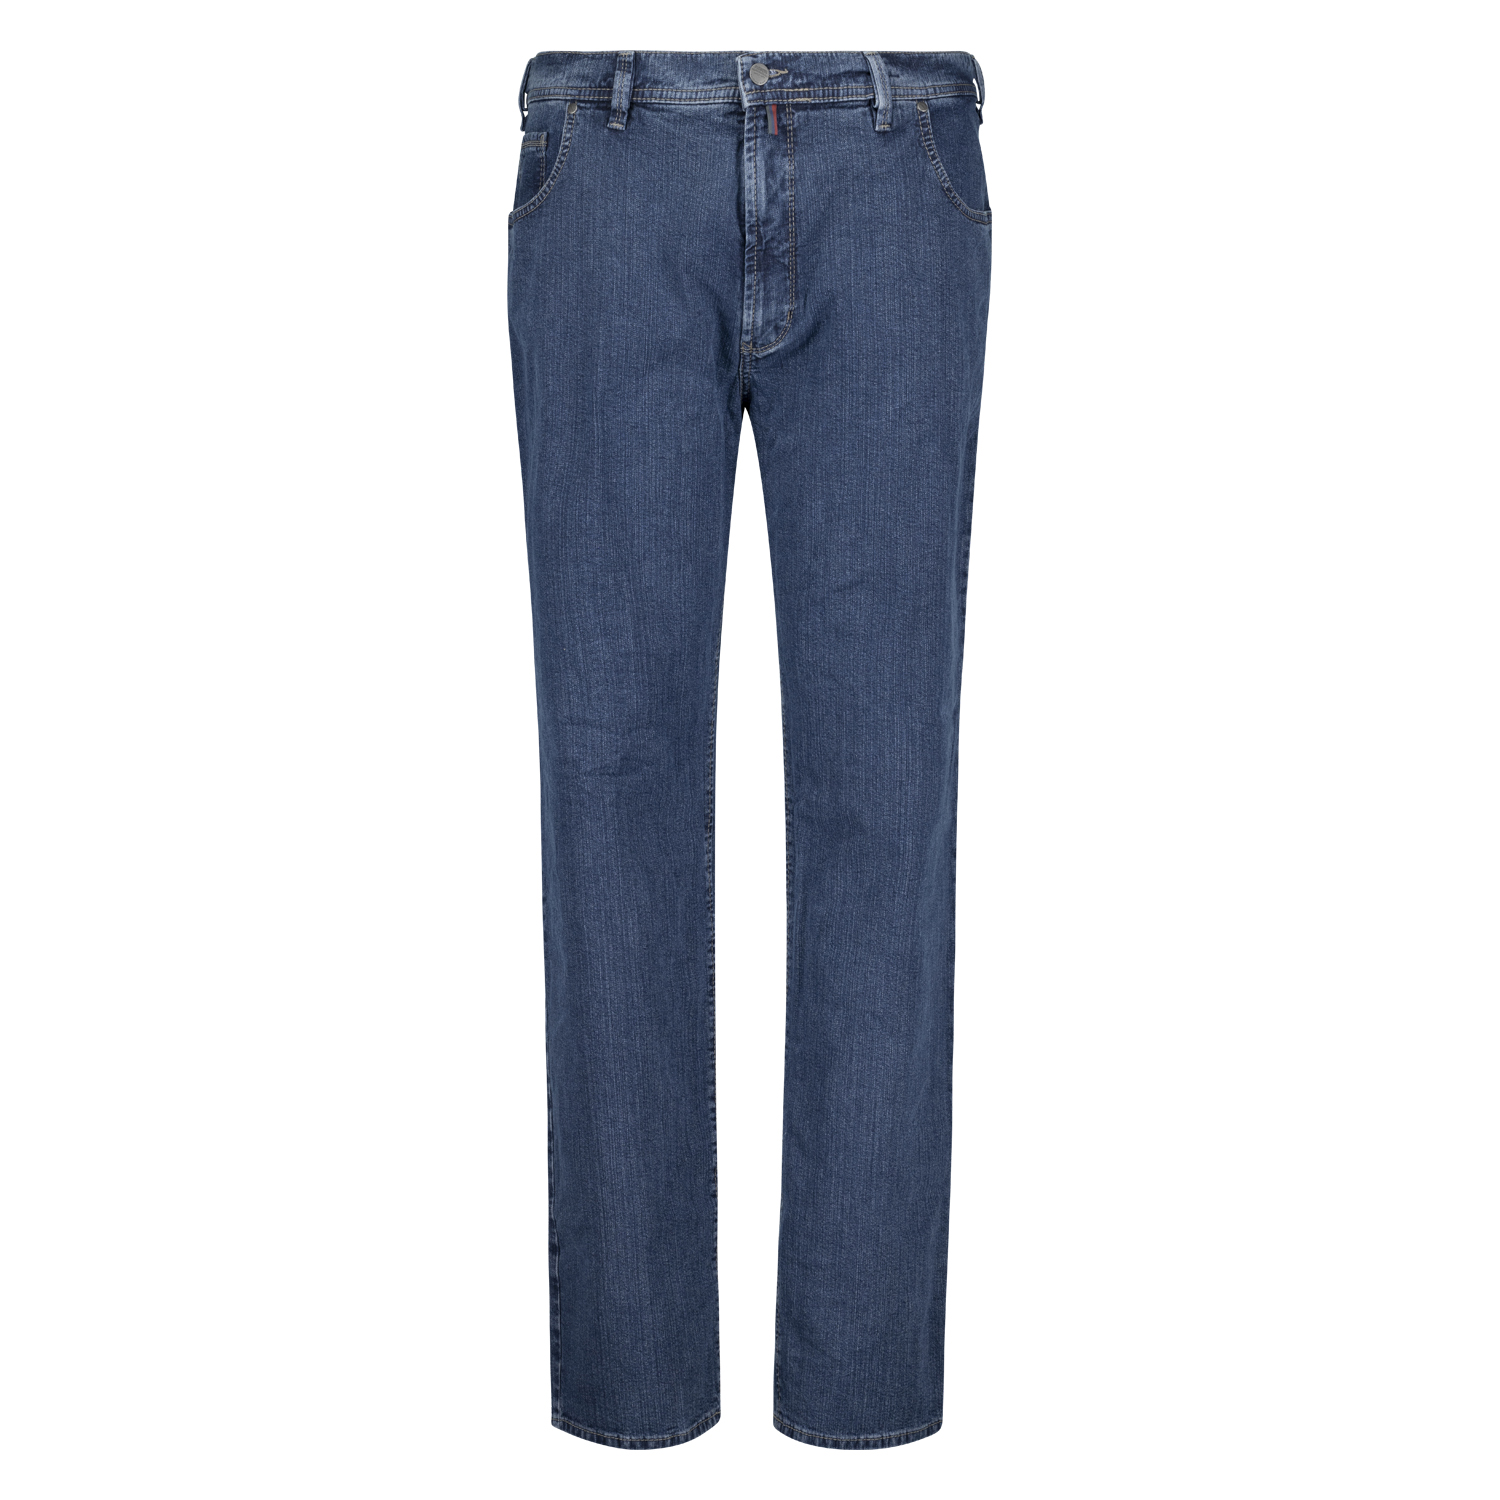 5-Pocket Jeans homme avec stretch "Peter" blue stonewash by Pioneer grandes tailles (Taille basse): 28 - 40